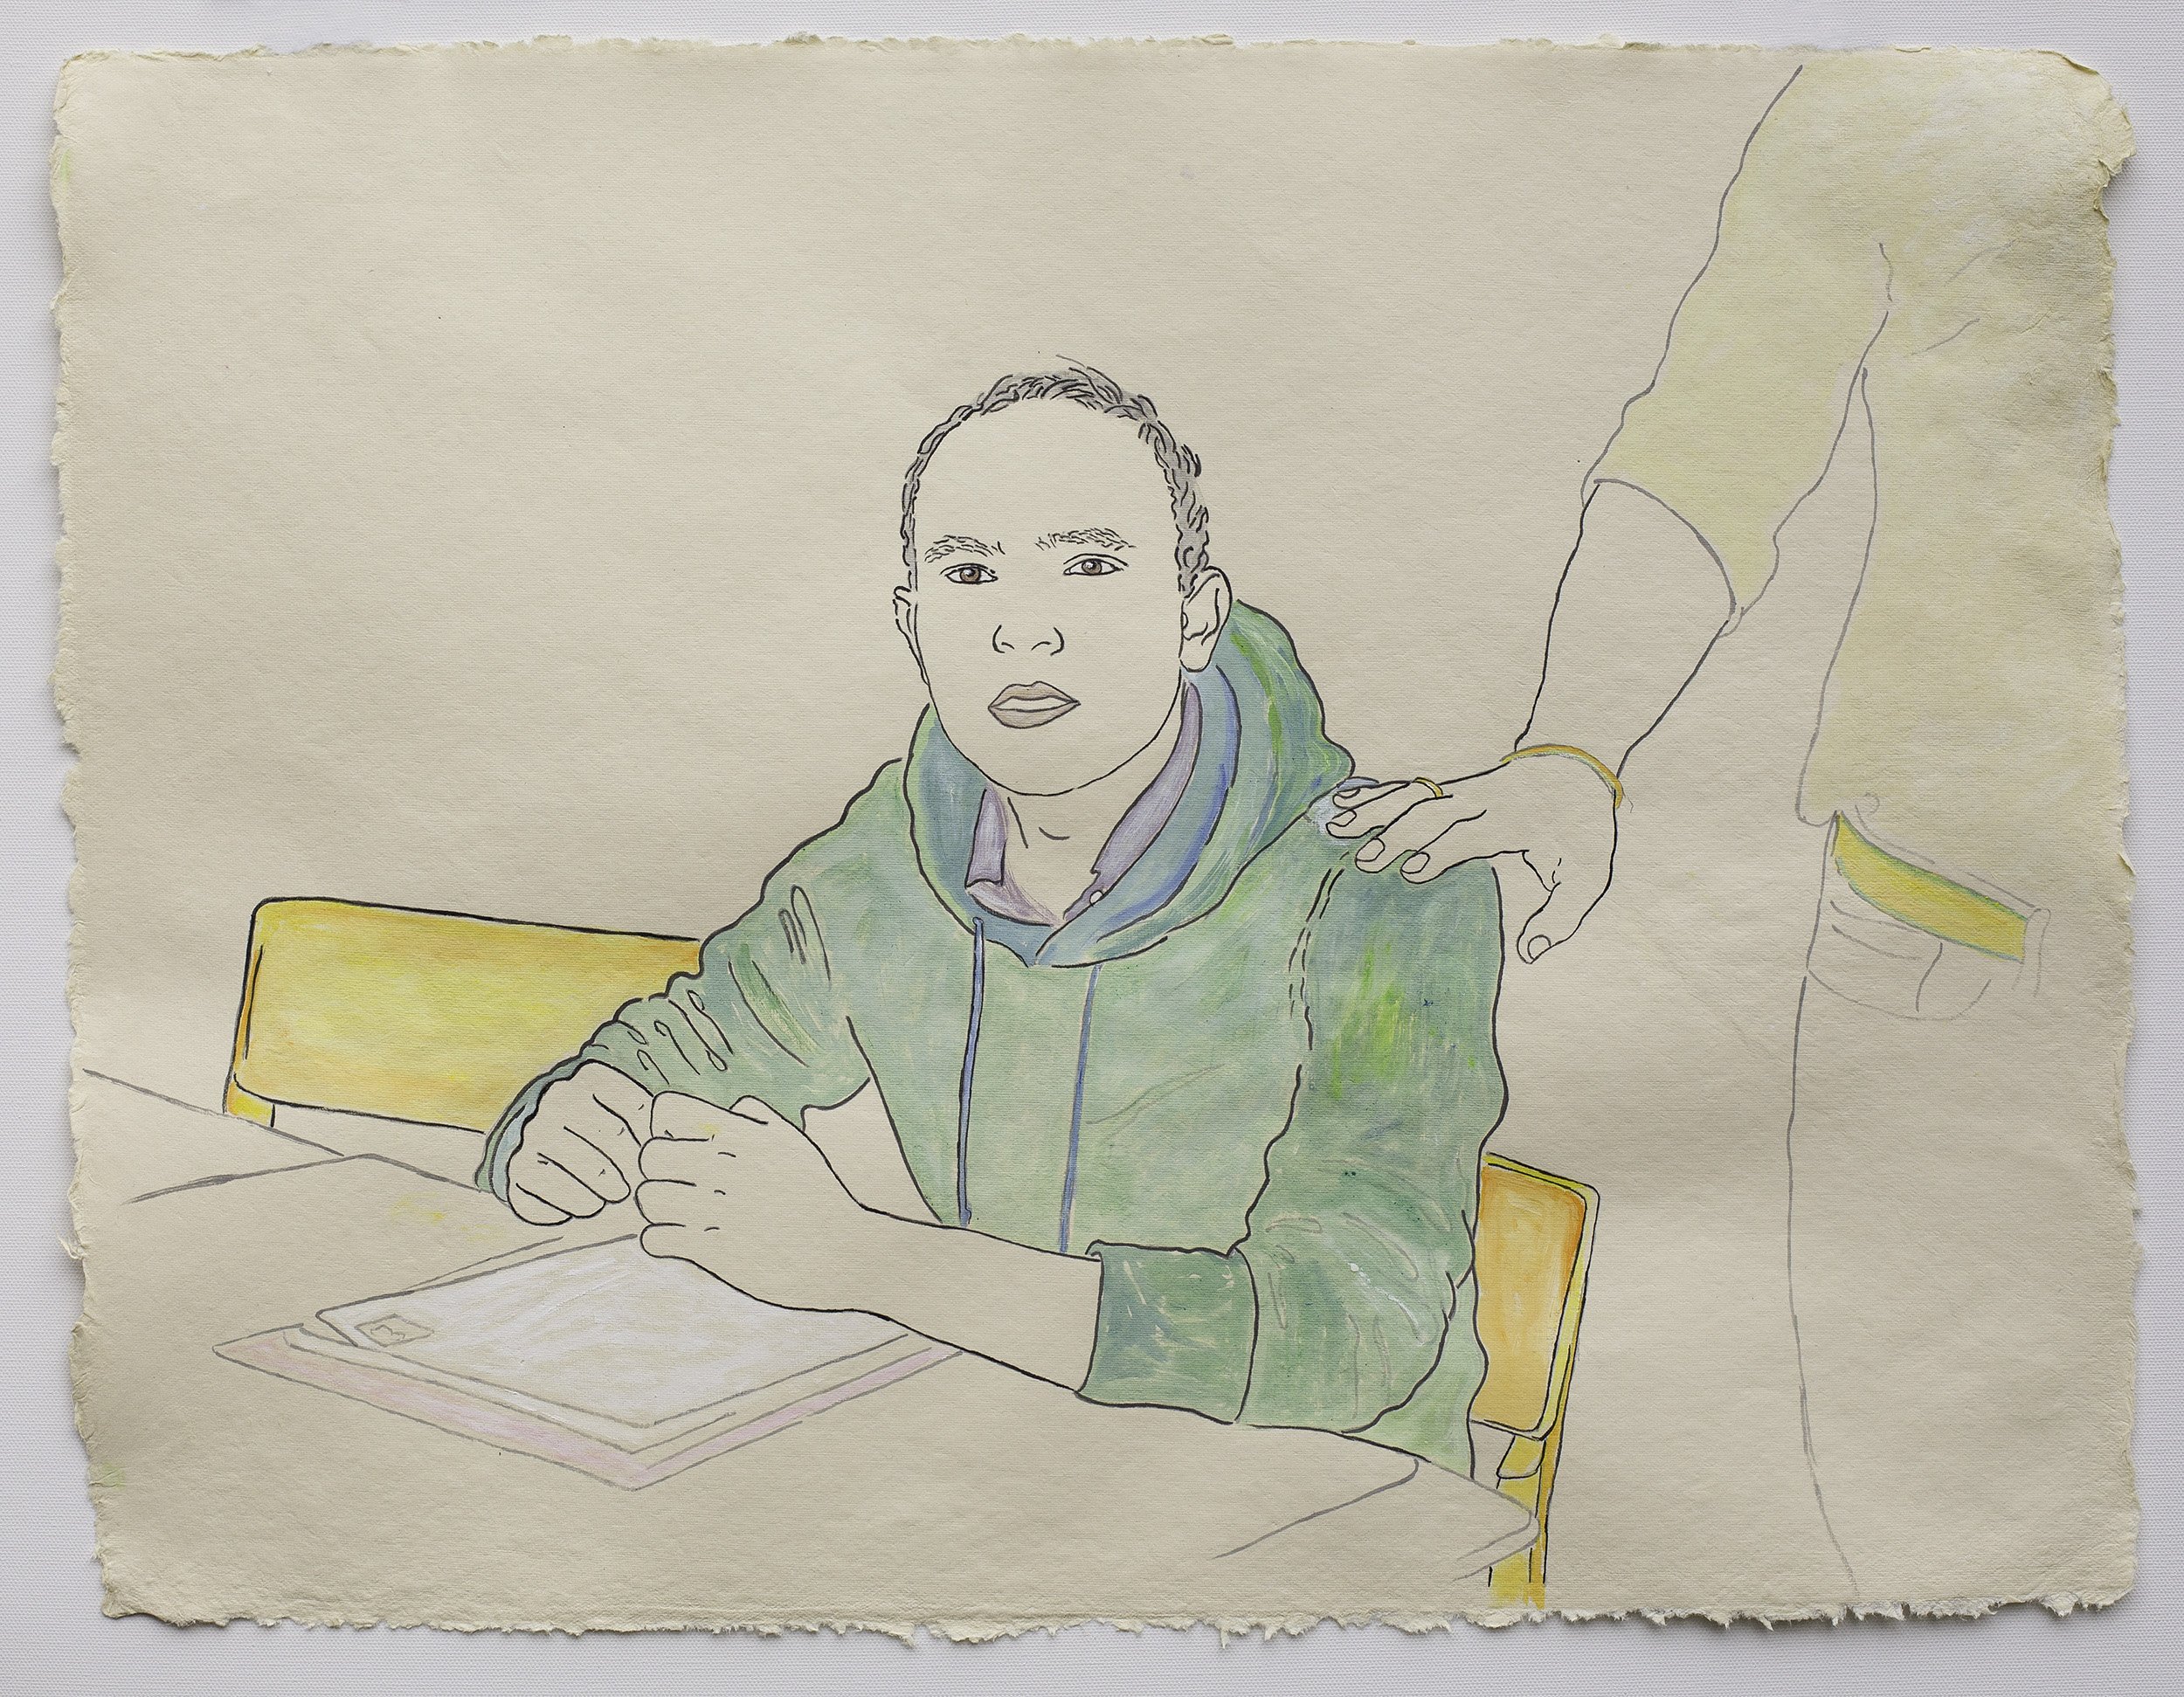   Man Applying for United States Citizenship, with Support from His Brother   2021, ink, watercolor, gouache on handmade paper made in India from recycled clothing, 19” x 25.”  In the UNI Permanent Art Collection, University of Northern Iowa. 